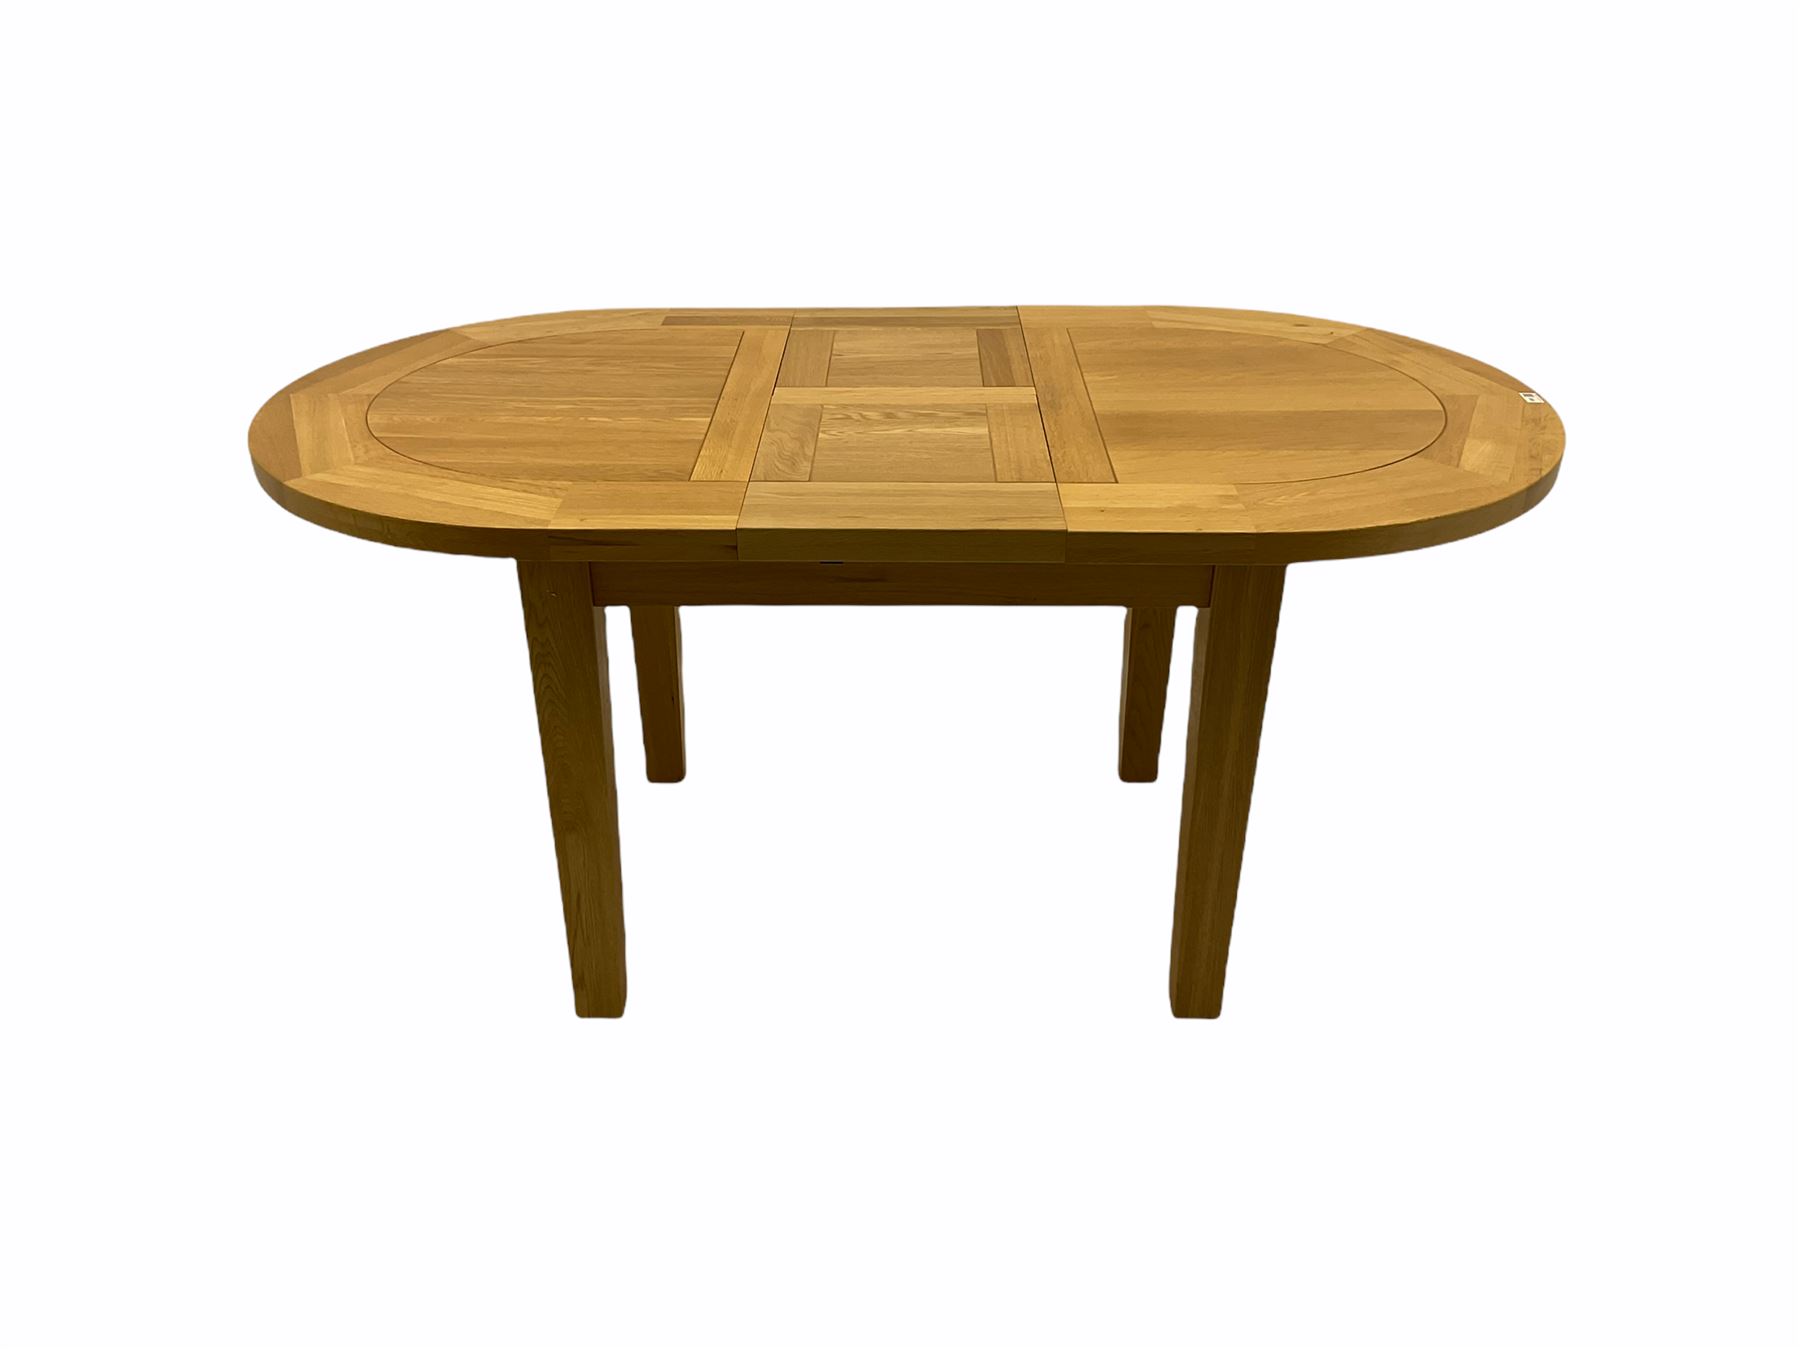 Solid oak oval extending dining table - Image 3 of 6